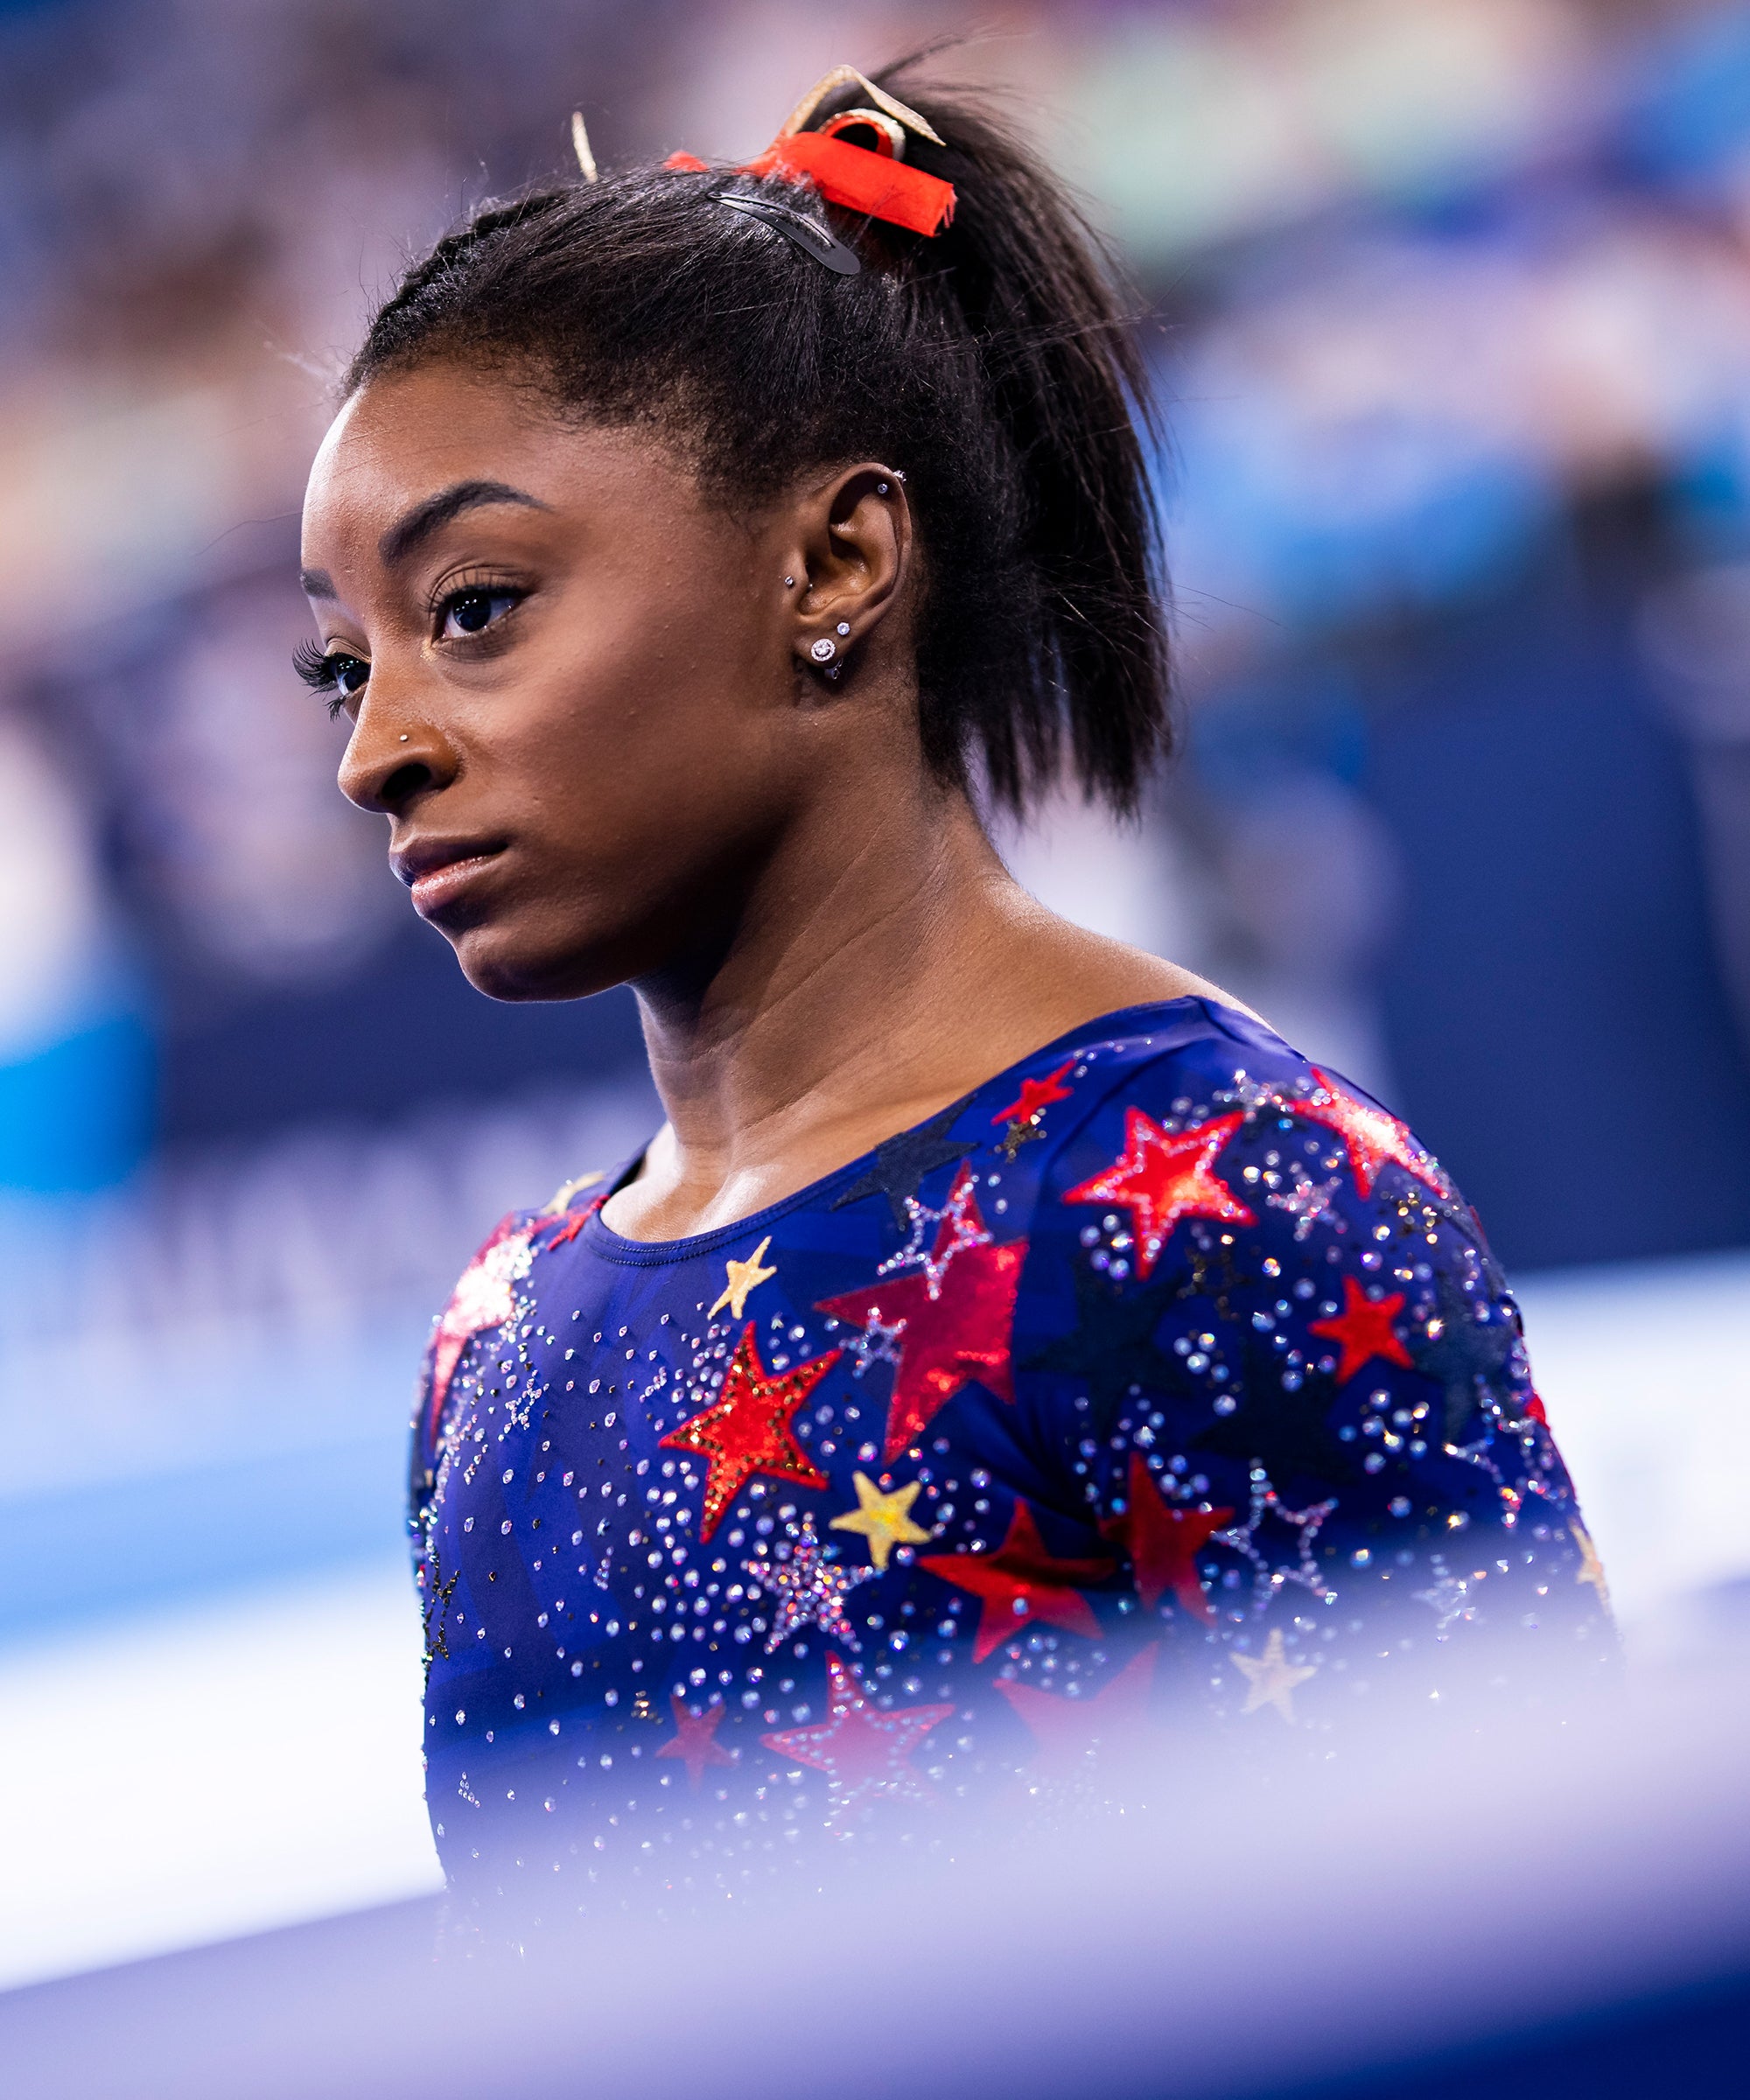 Simone Biles withdraws from Olympic floor exercise final - The Japan Times